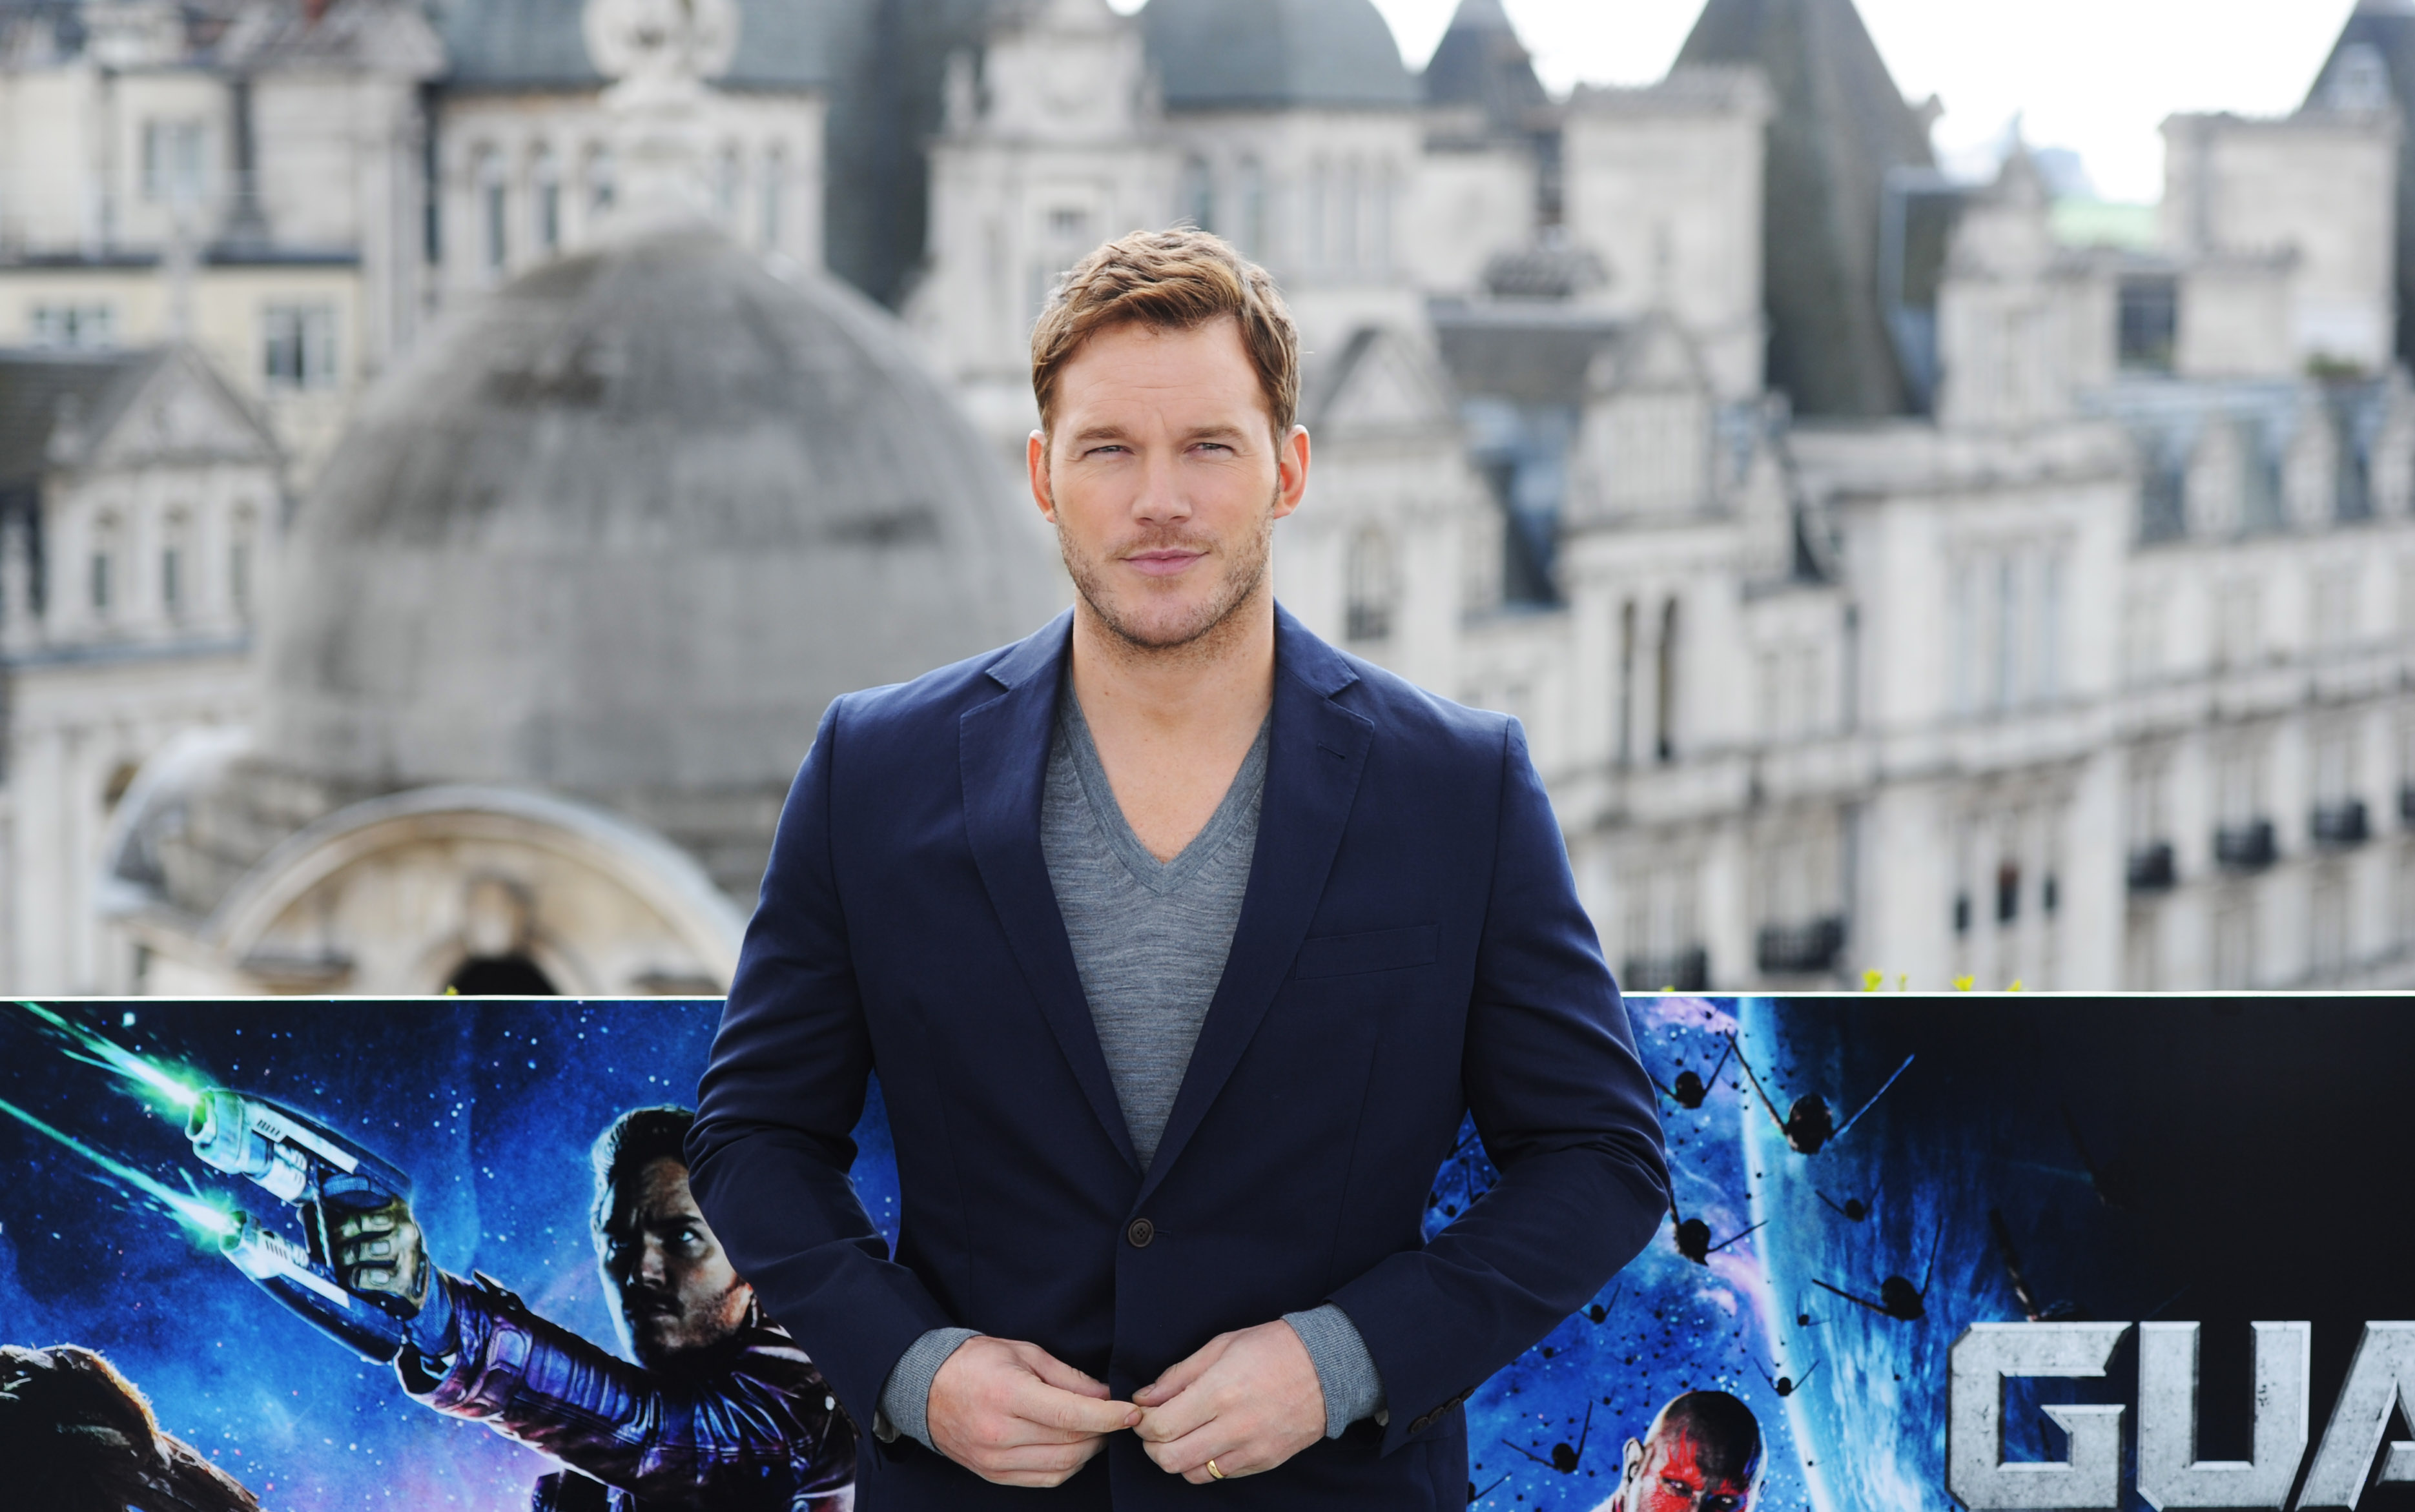 Chris Pratt, who plays Peter Quill in 'Guardians of the Galaxy,' posing in front of a movie poster